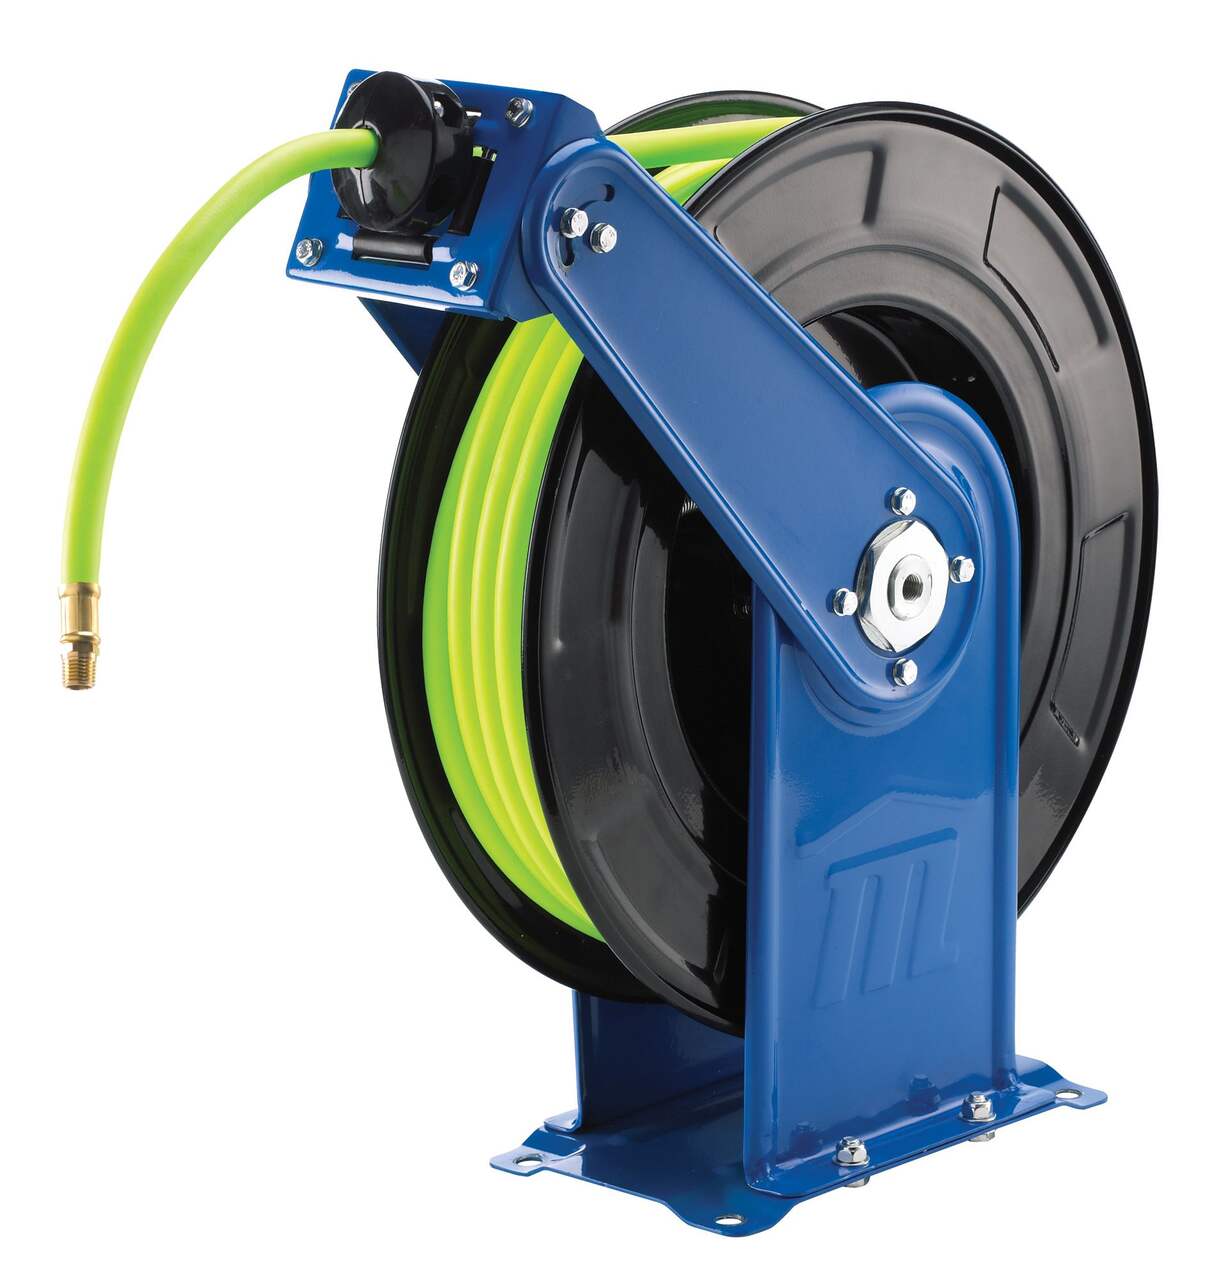 General Grease Hose Reels Archives - Hose, Cord and Cable Reels